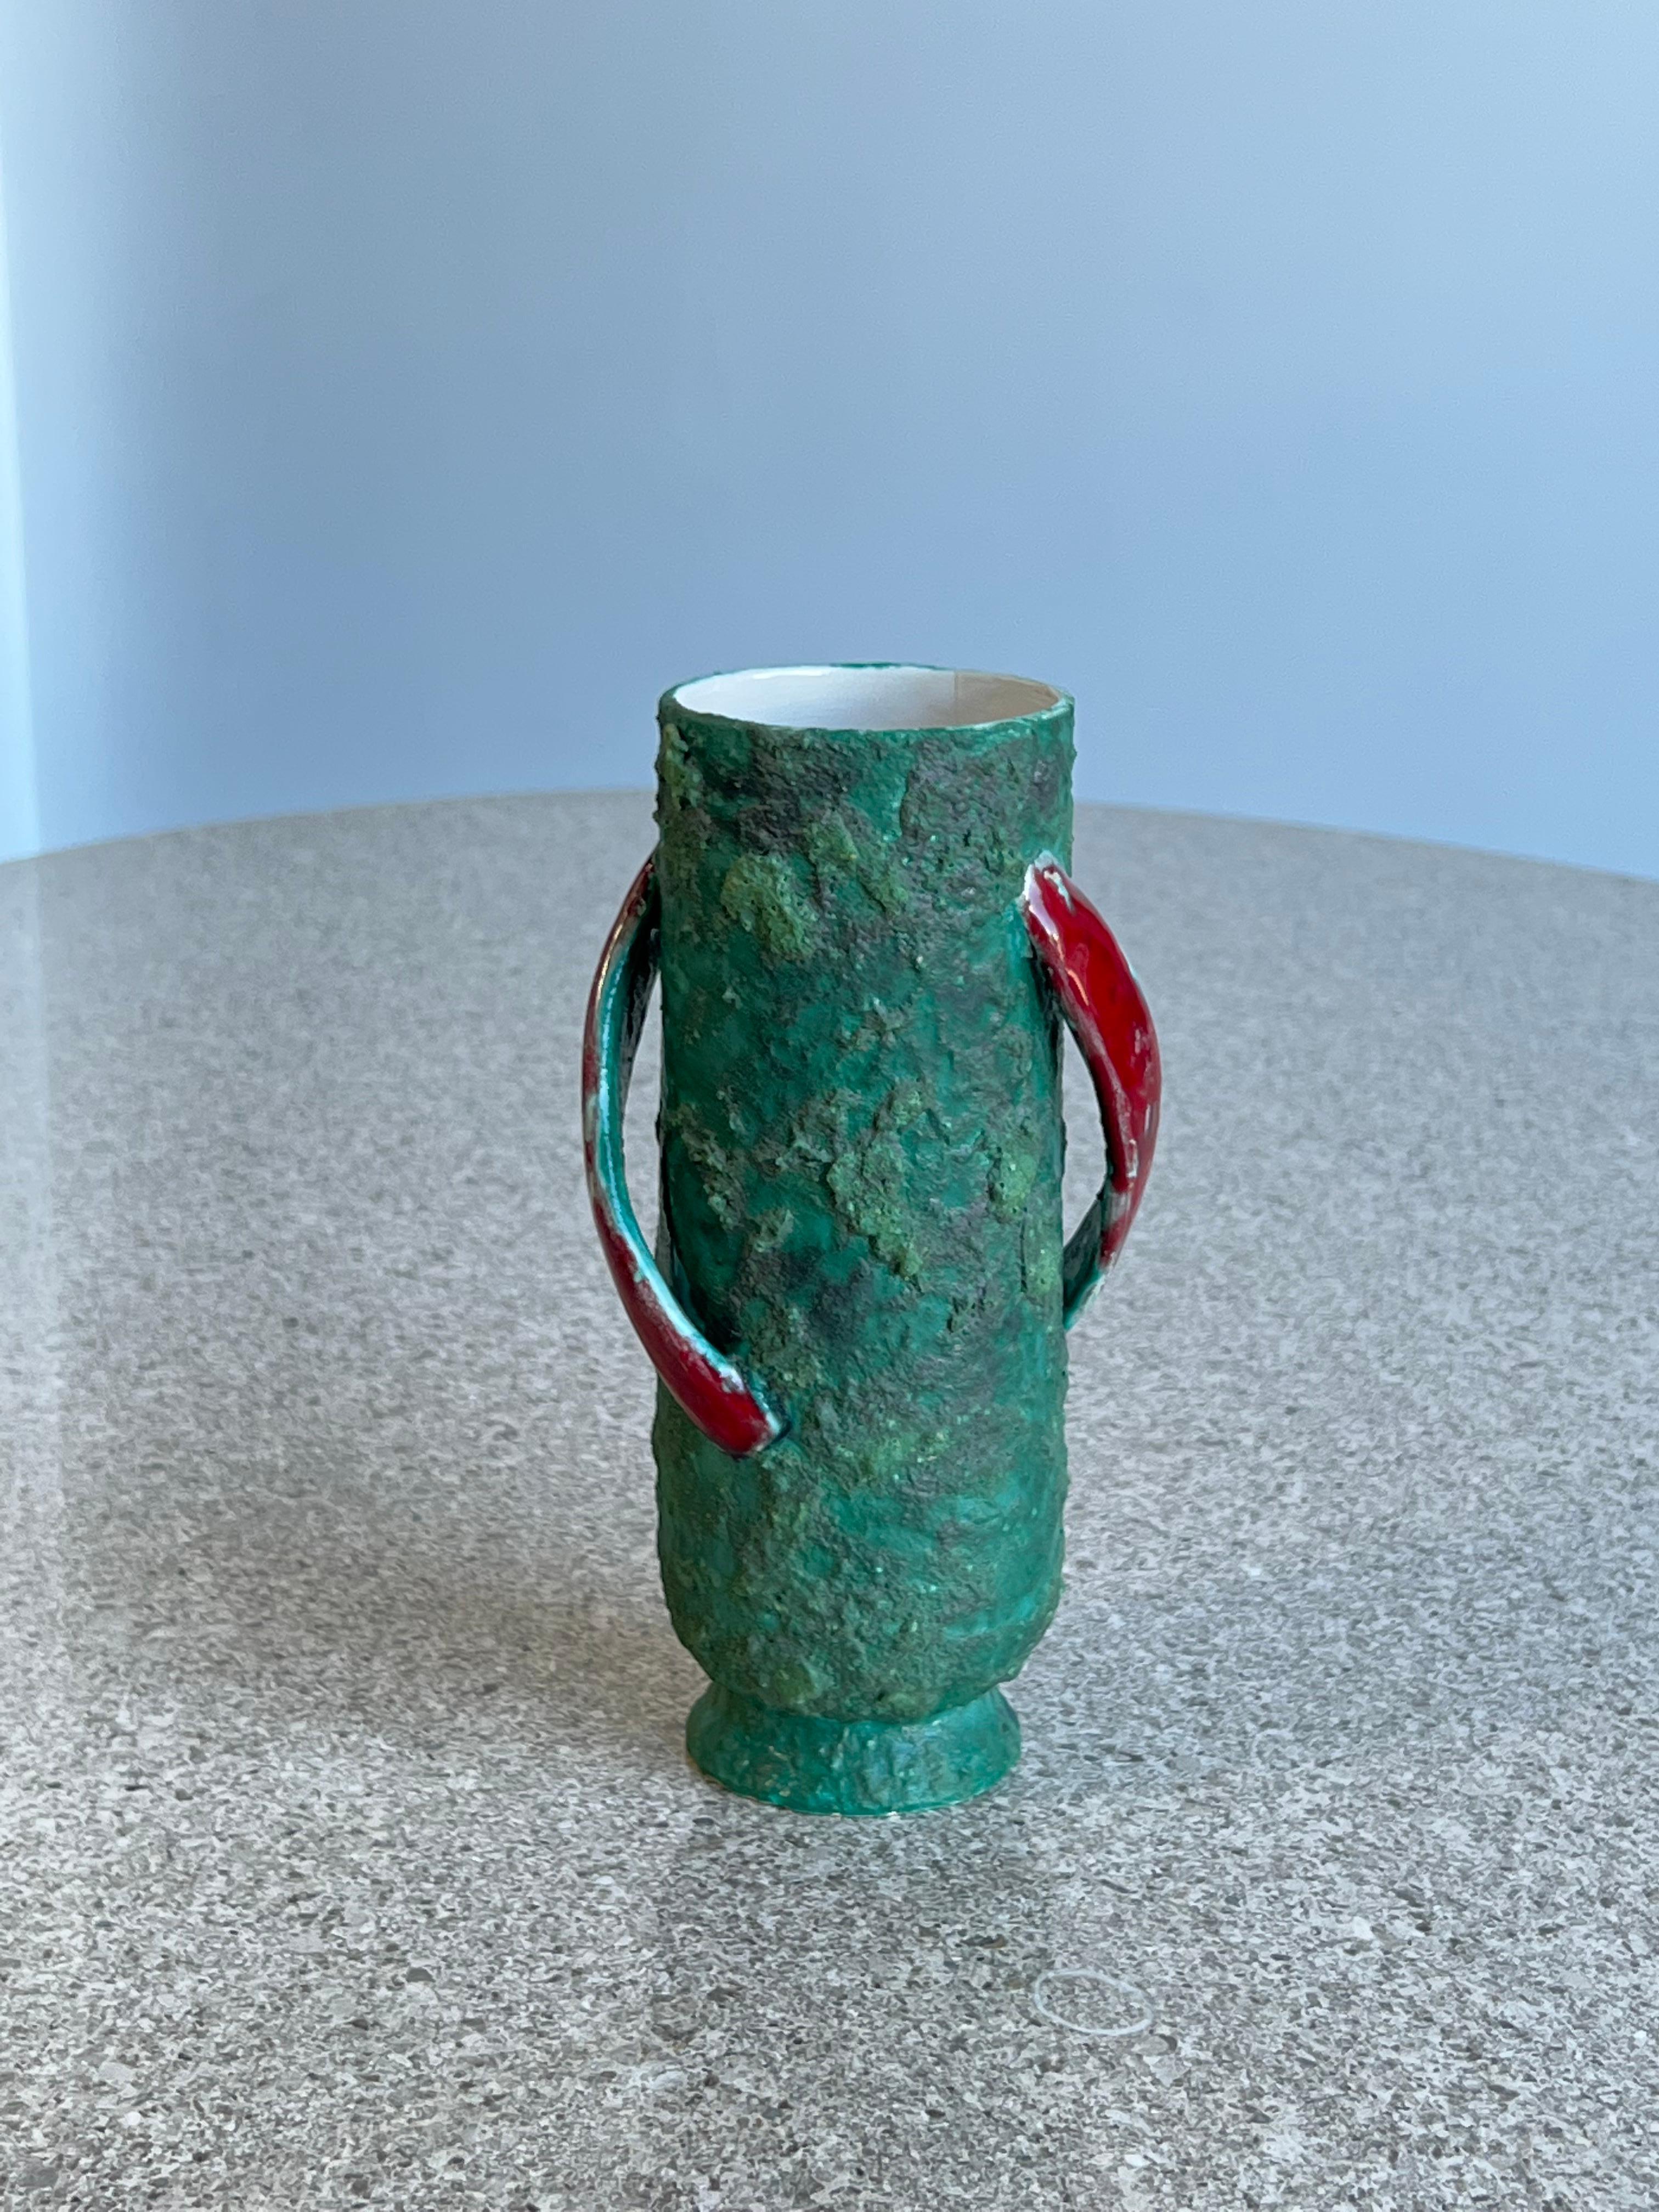 Art lava stunning vase 1960 Italy.
Beautiful aqua green colour and red glazed ceramic handles. 
Perfect centrepiece for a dinning table or credenza.
